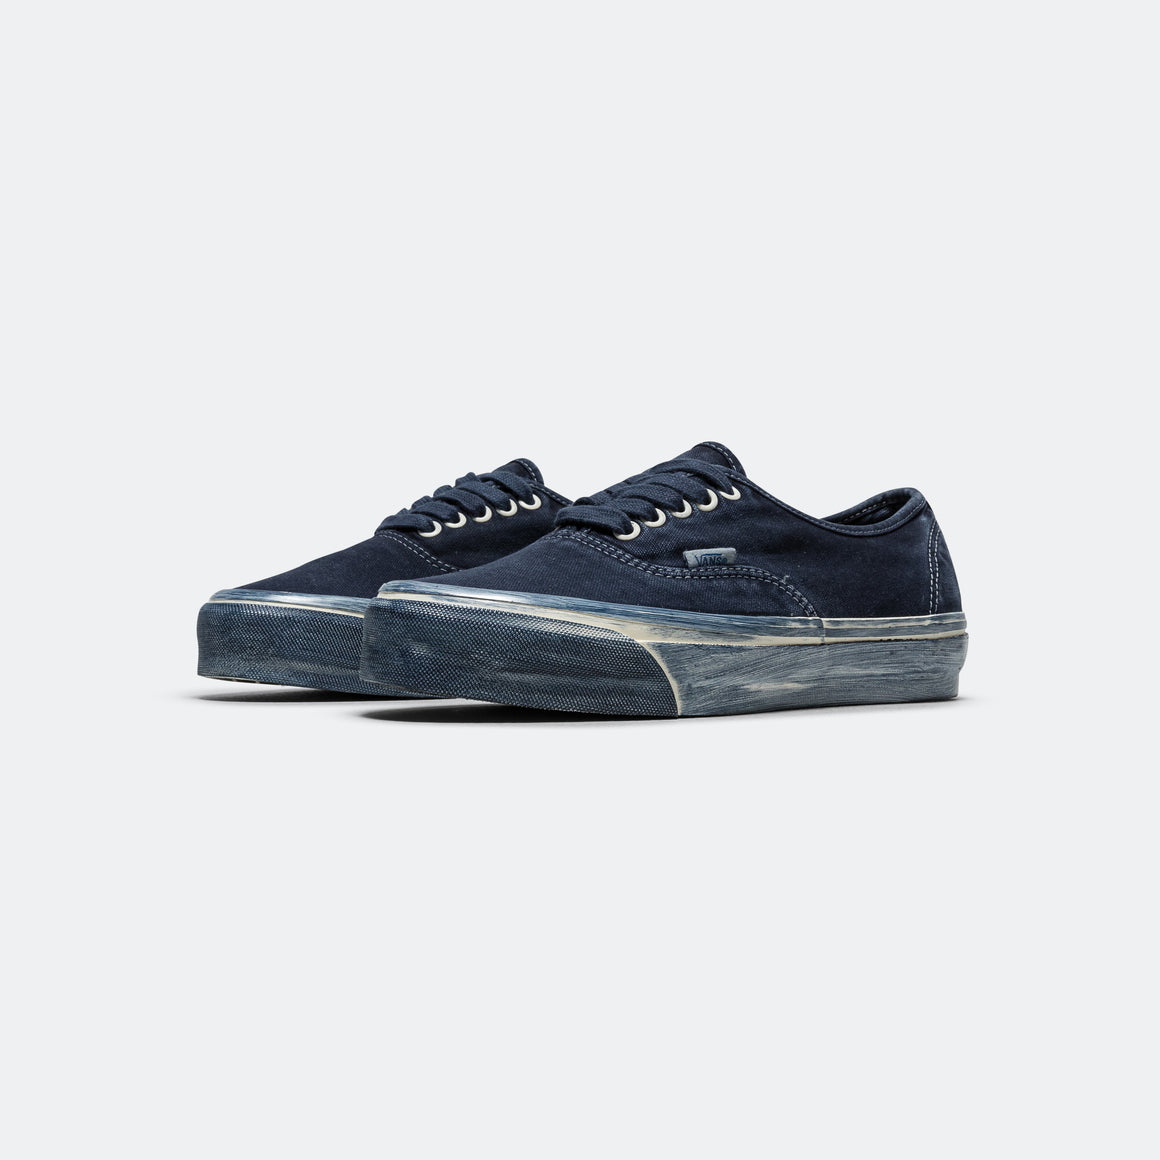 Vans - Authentic Reissue 44 LX Dip Dye - Dress Blues - UP THERE